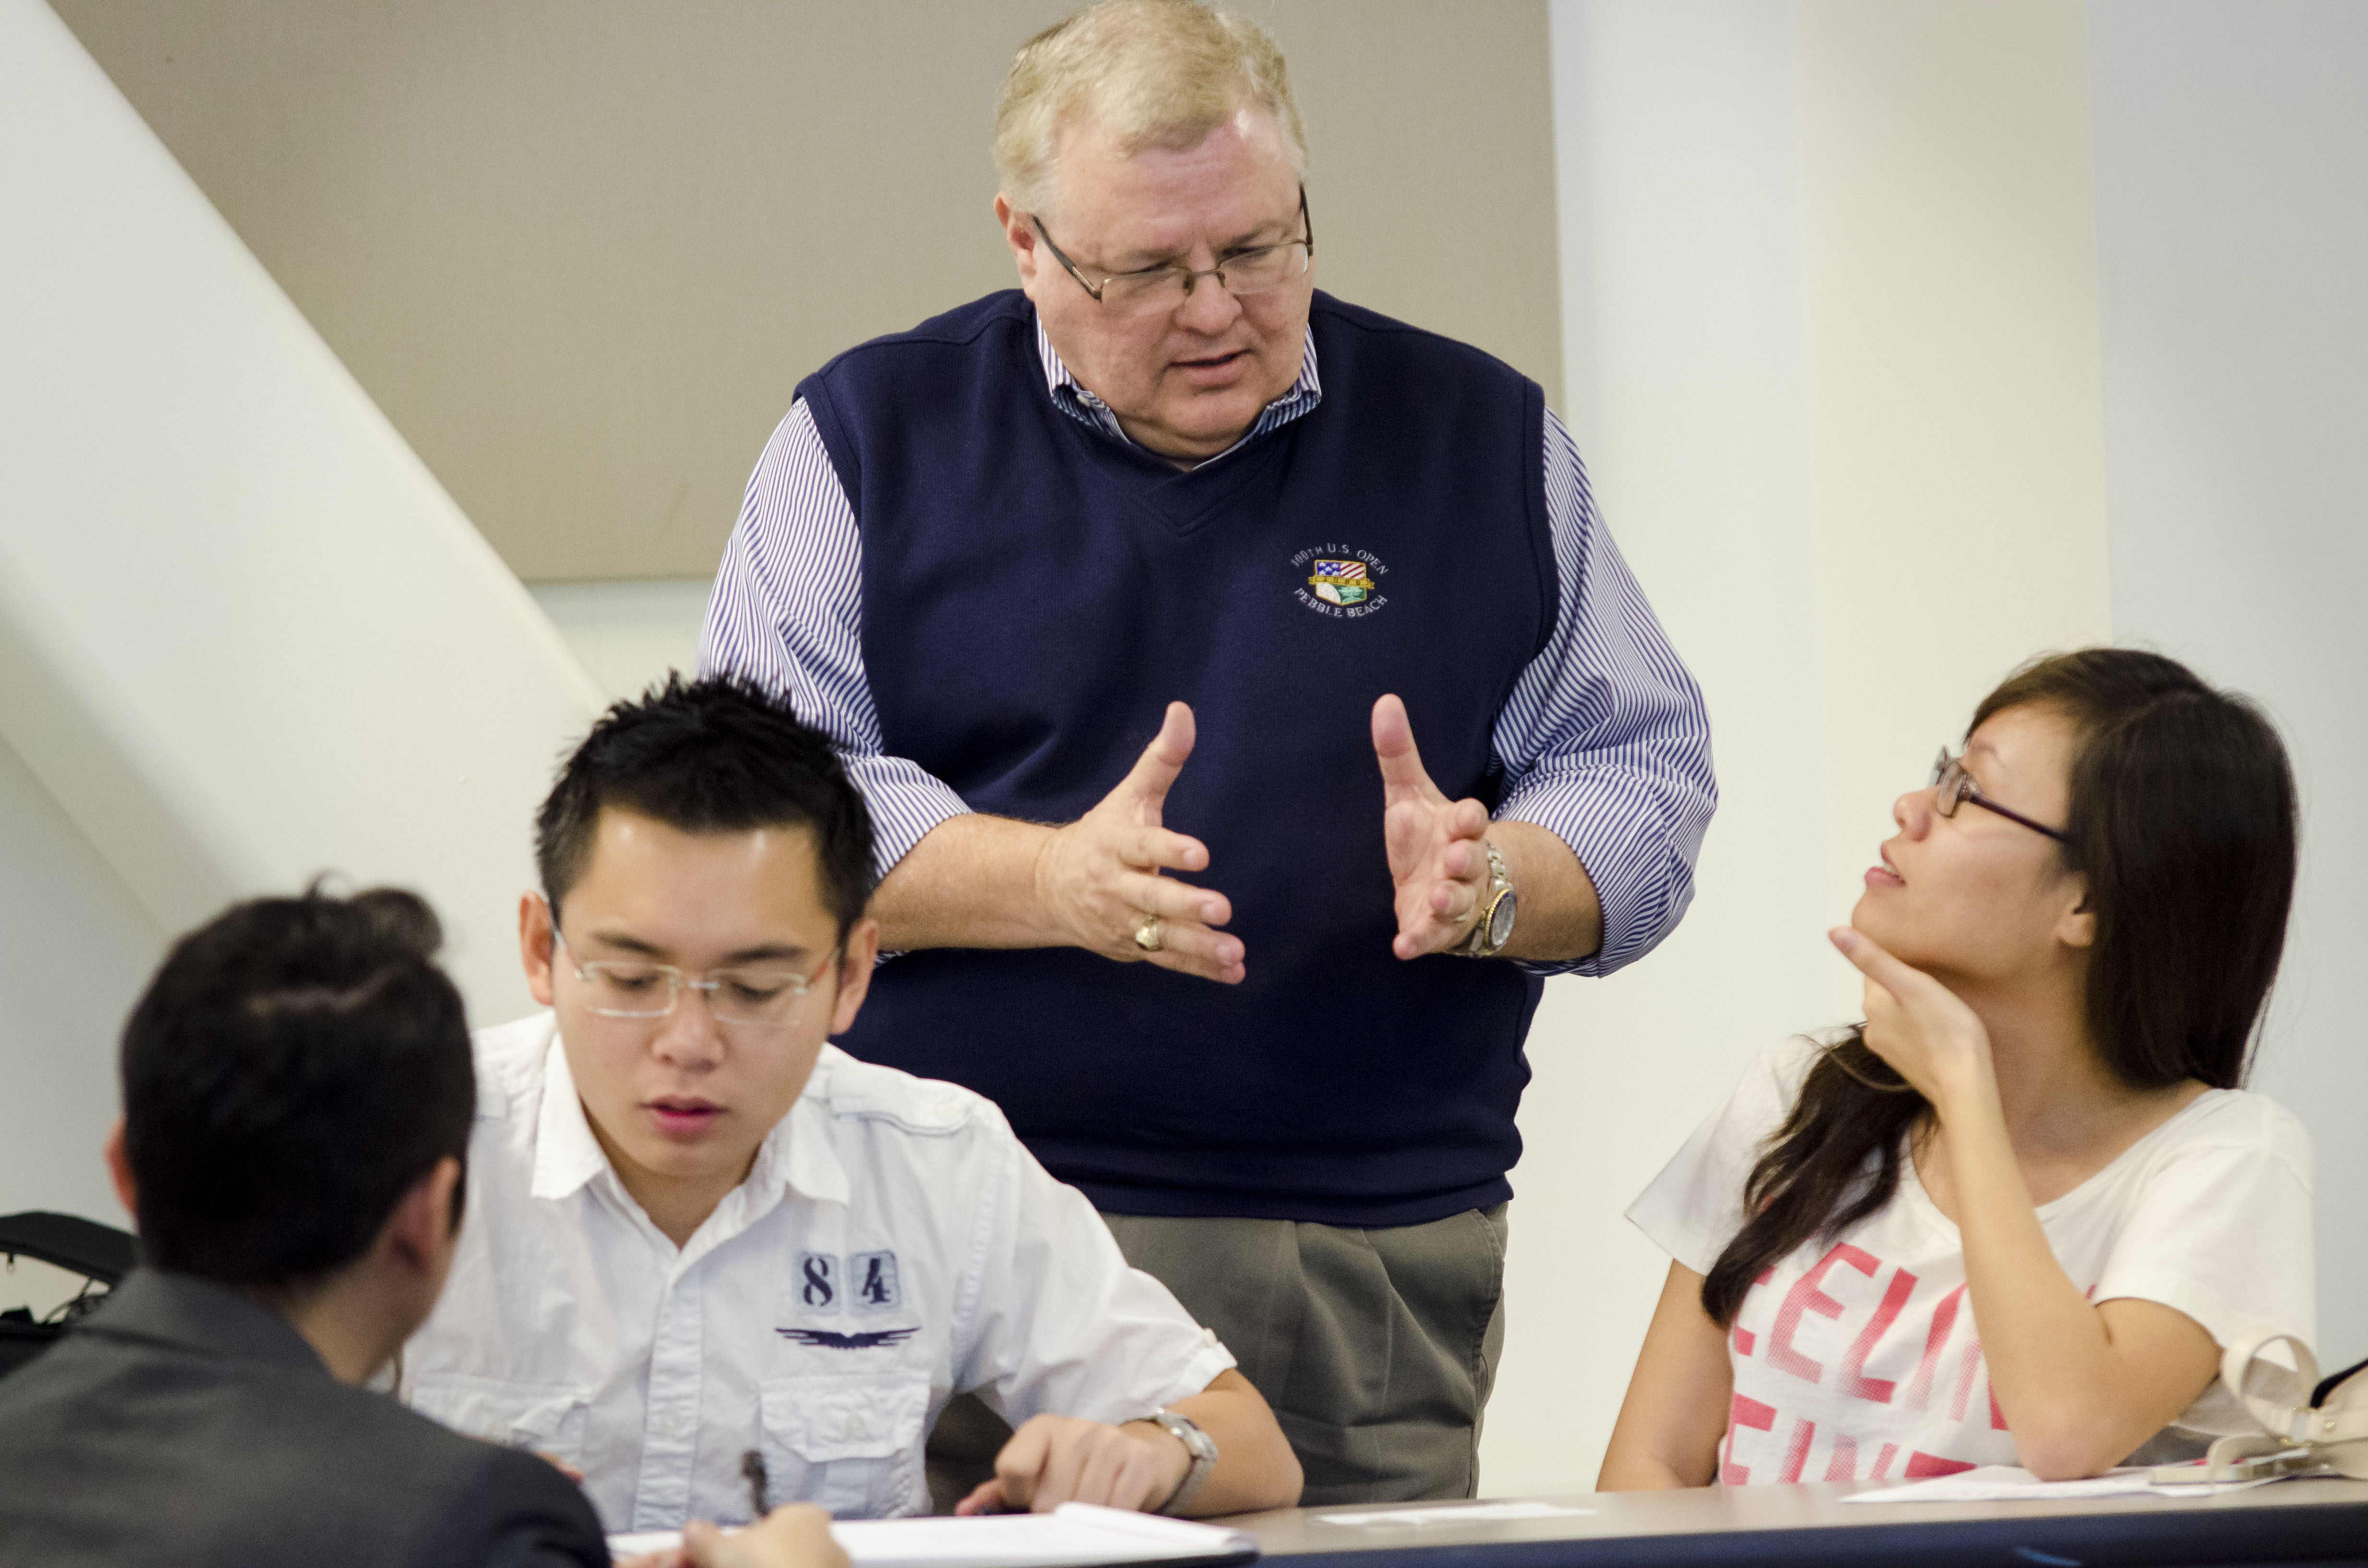 University, industry find mutual benefits through business advising programs